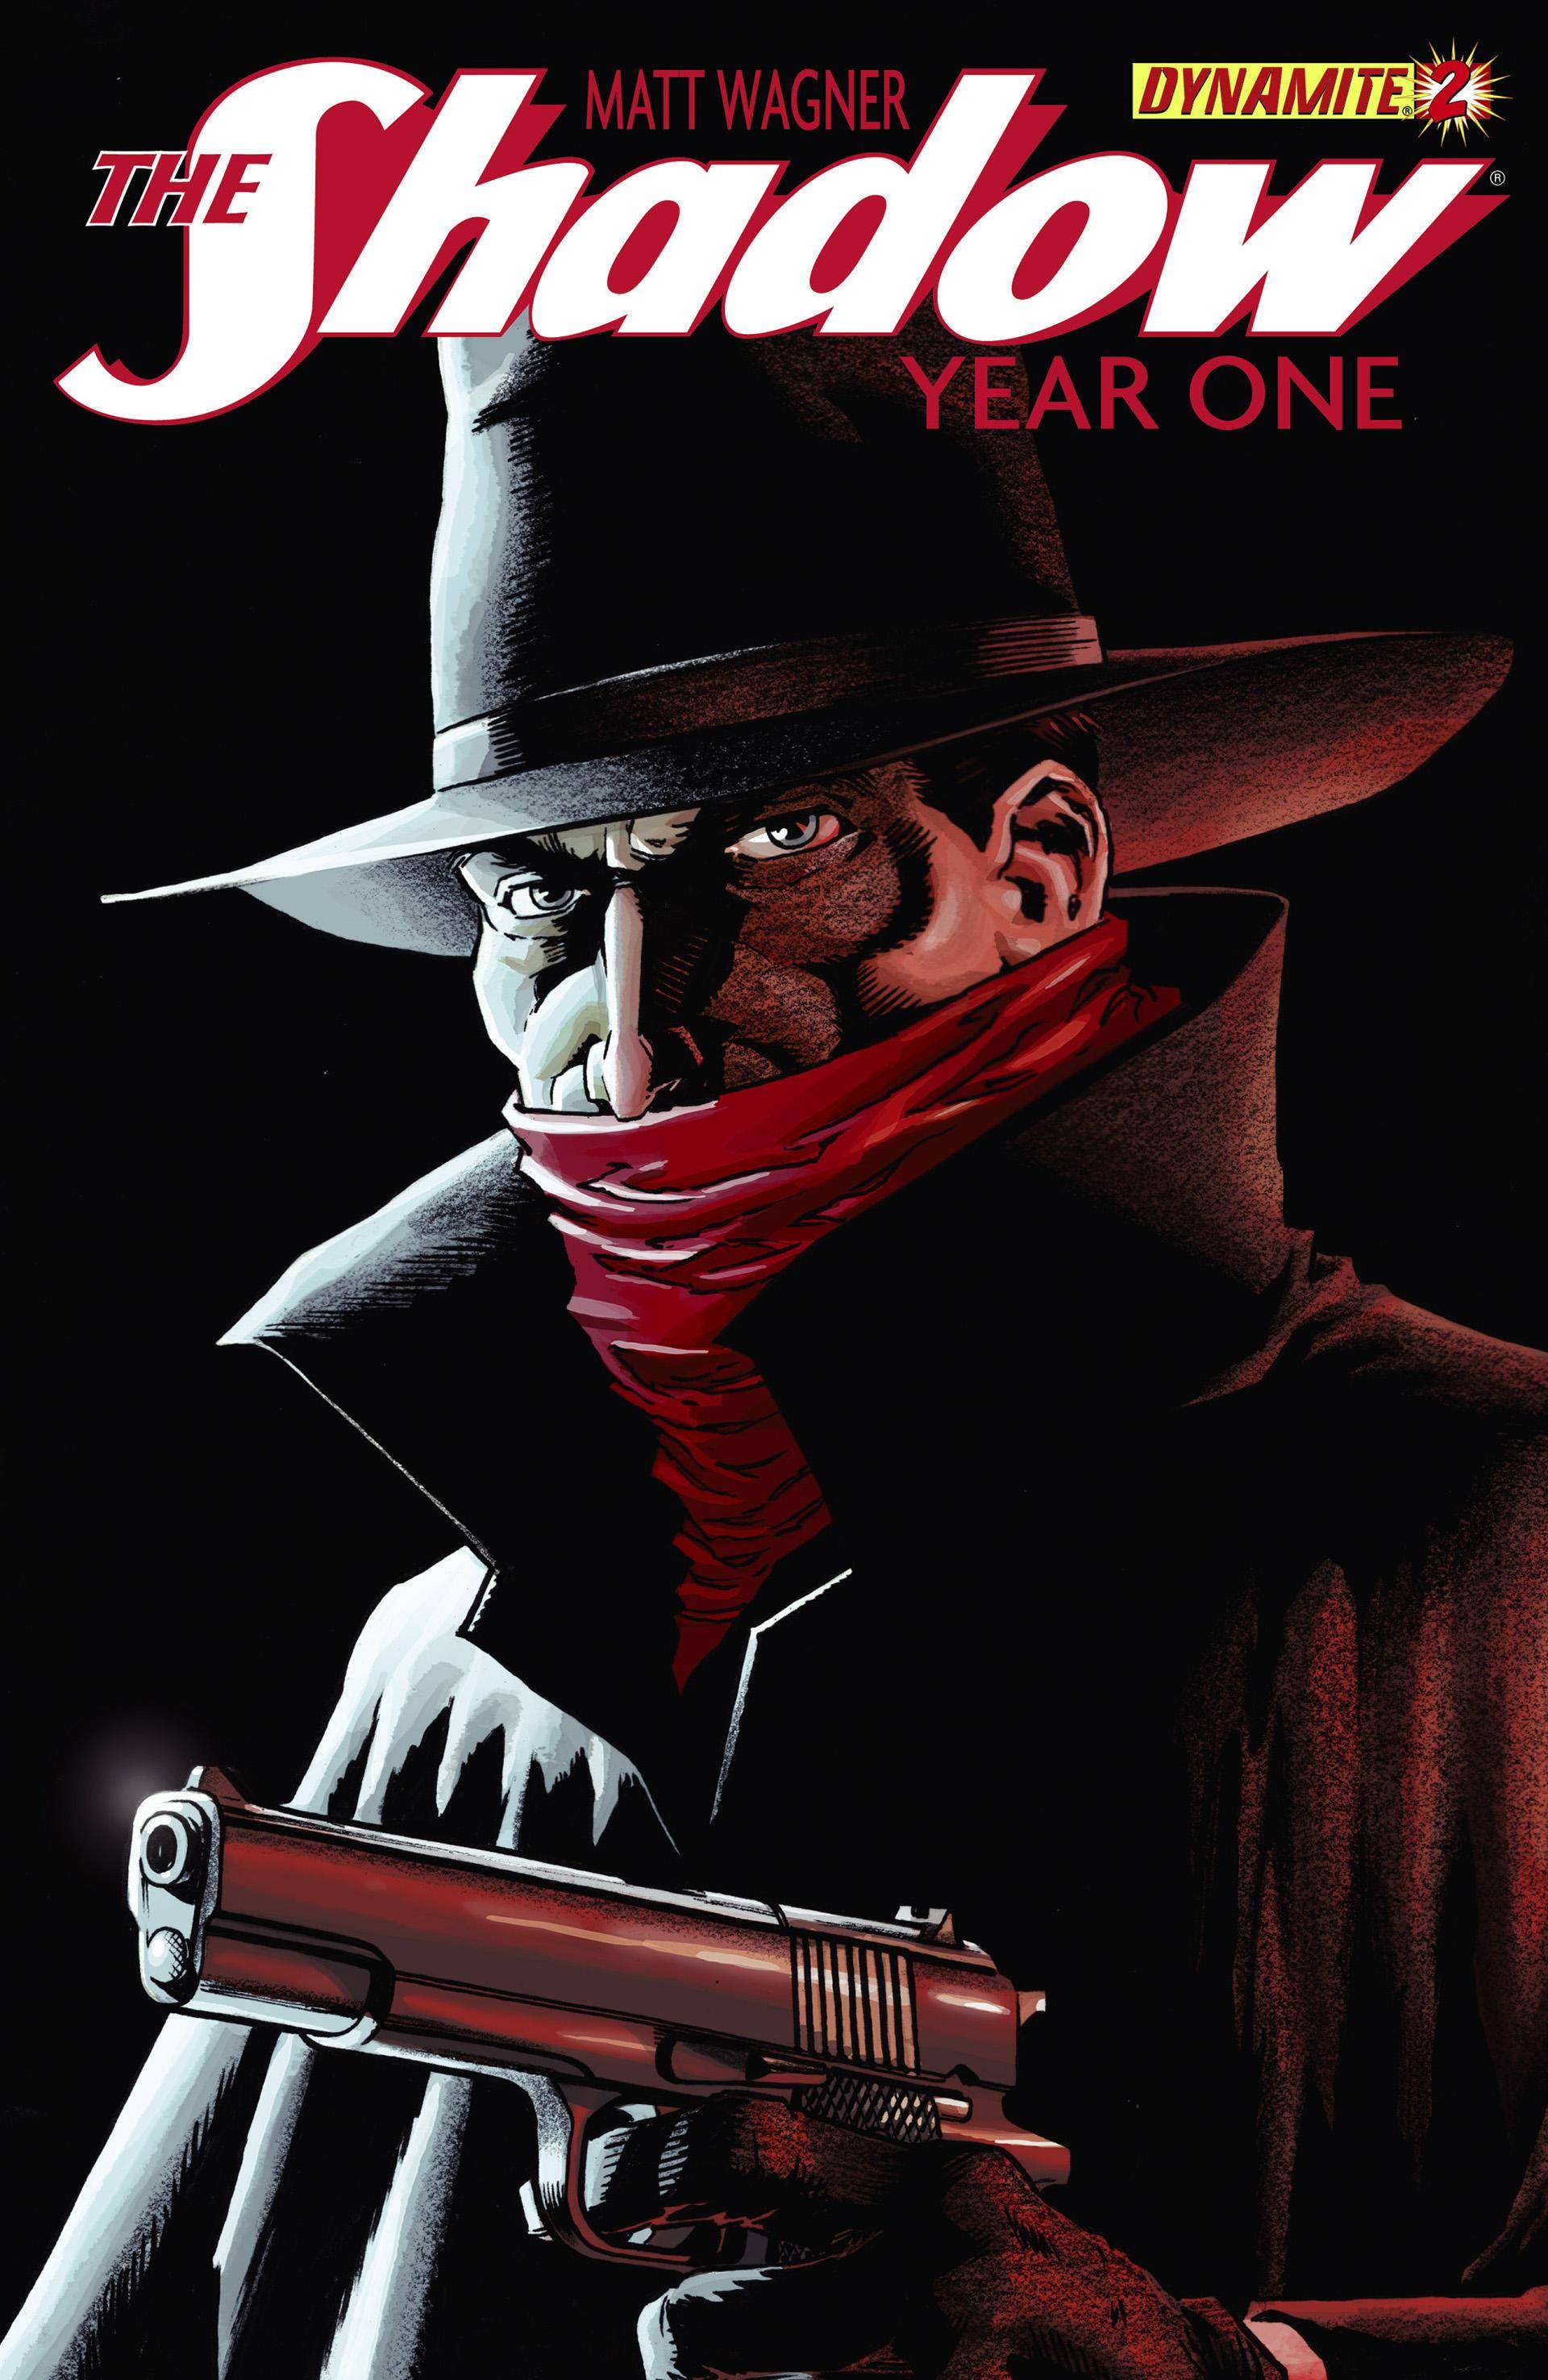 The Shadow - Year One 02 (of 08) (2013) (4 Covers) (Digital) (Darkness-Empire)